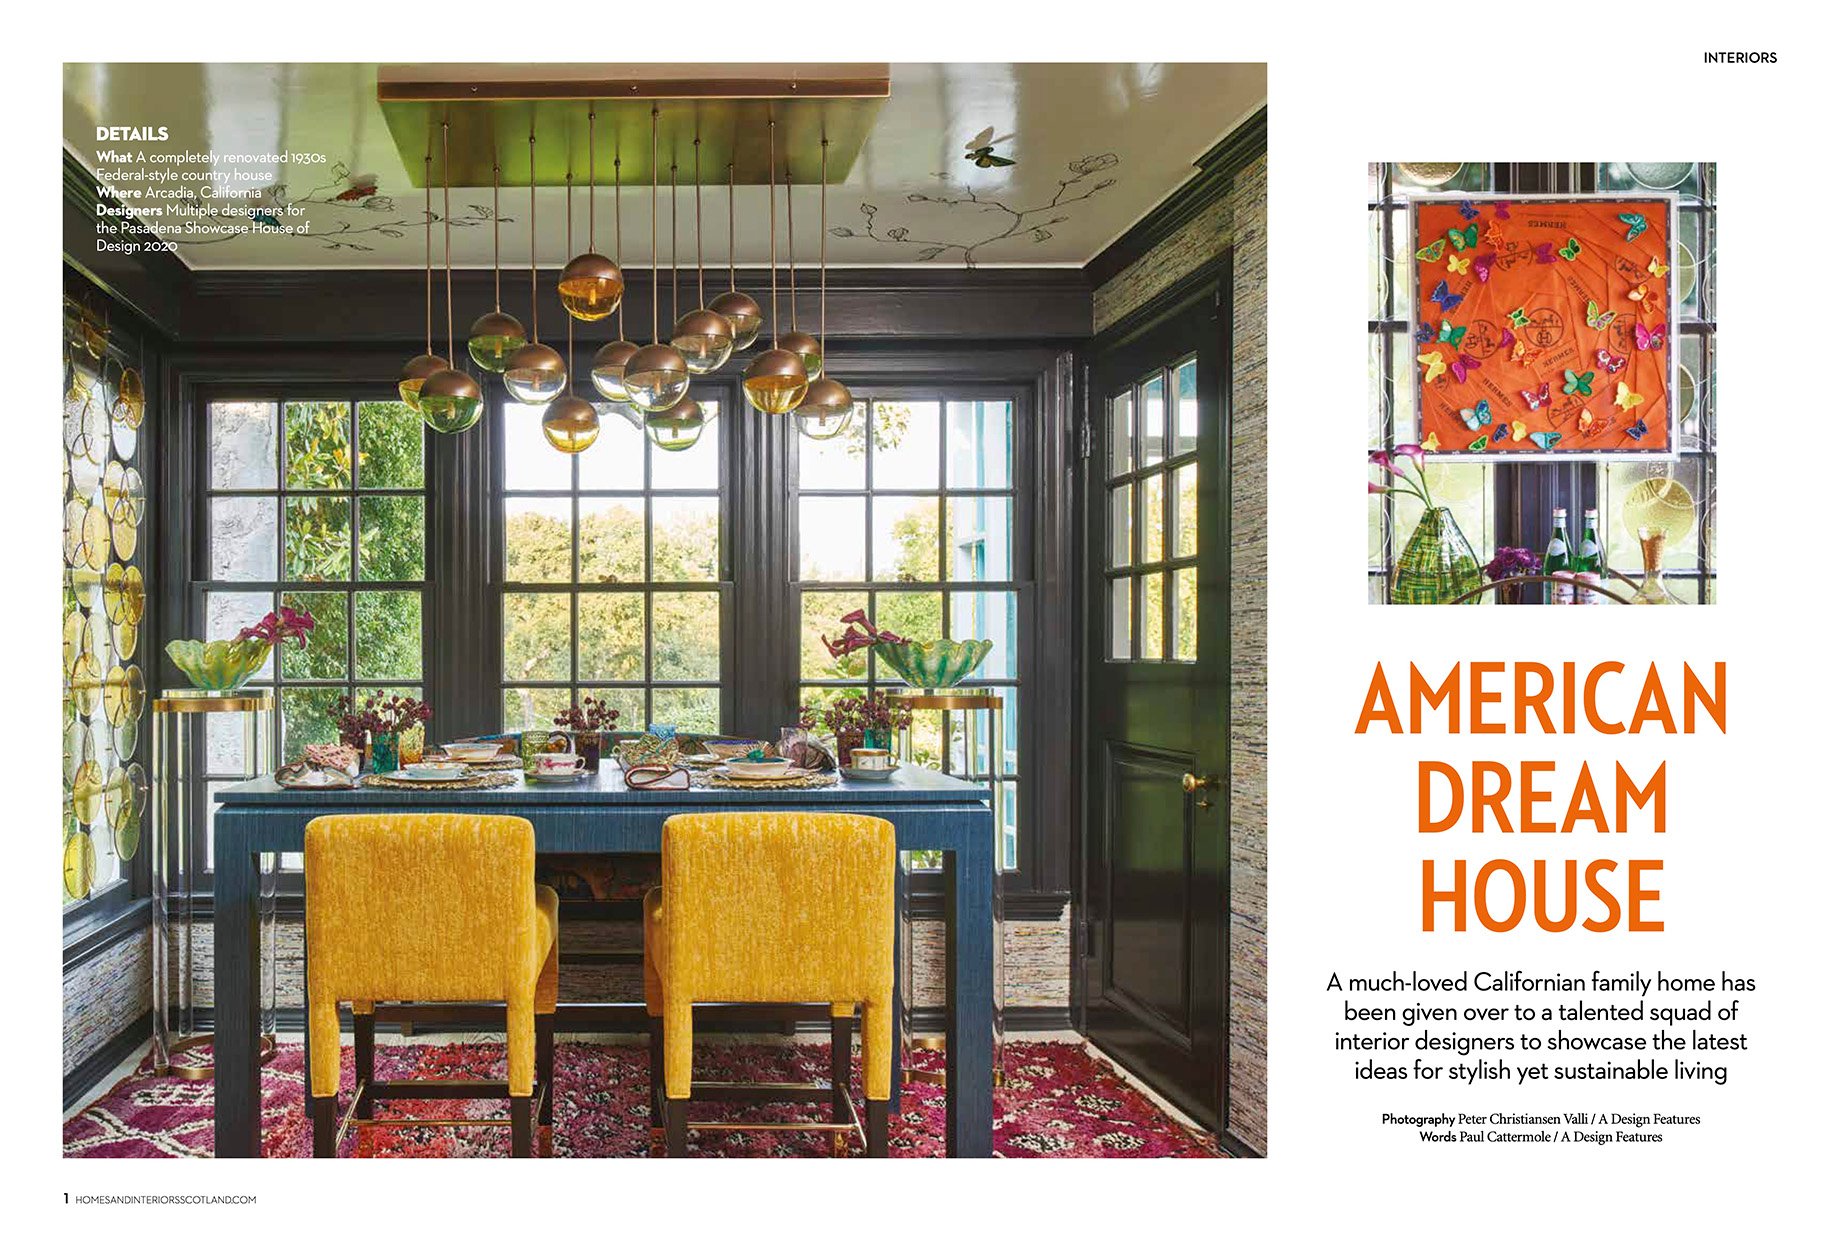 Tearsheet from A Design Features featuring image by Peter Valli for Pasadena Showcase House of Design